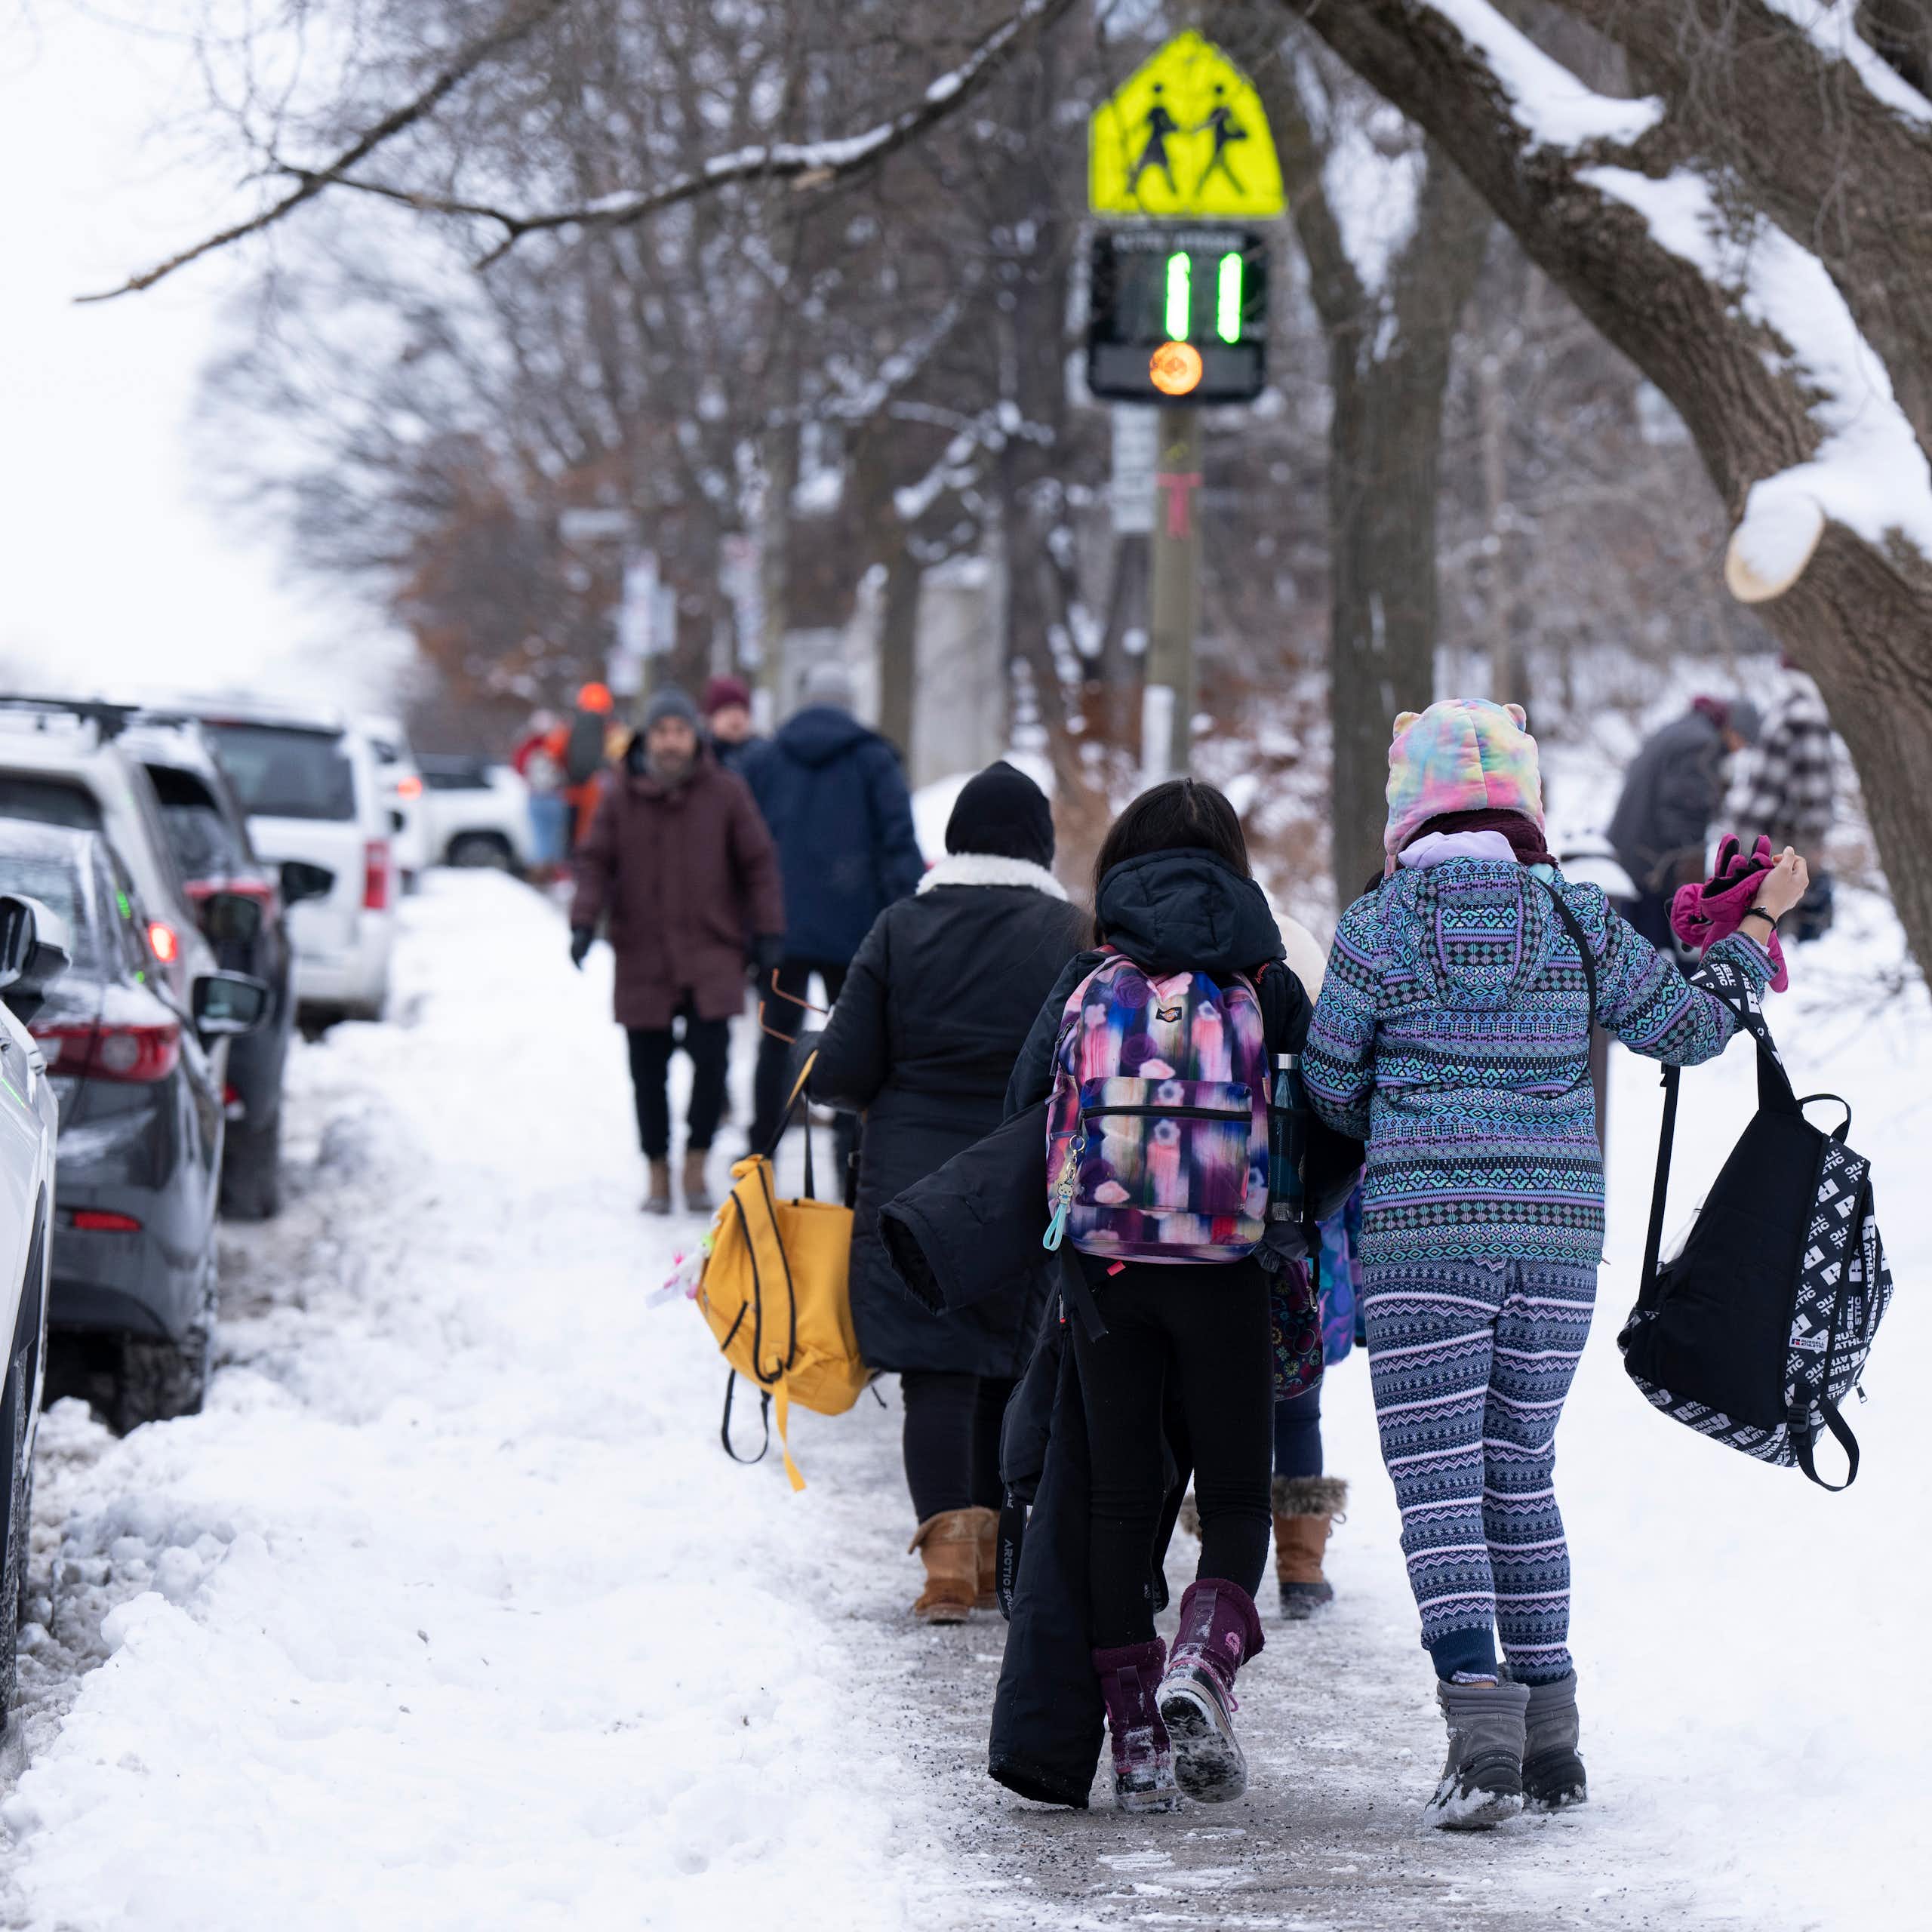 Students in winter coats and backpacks seen on a snowy sidewalk.